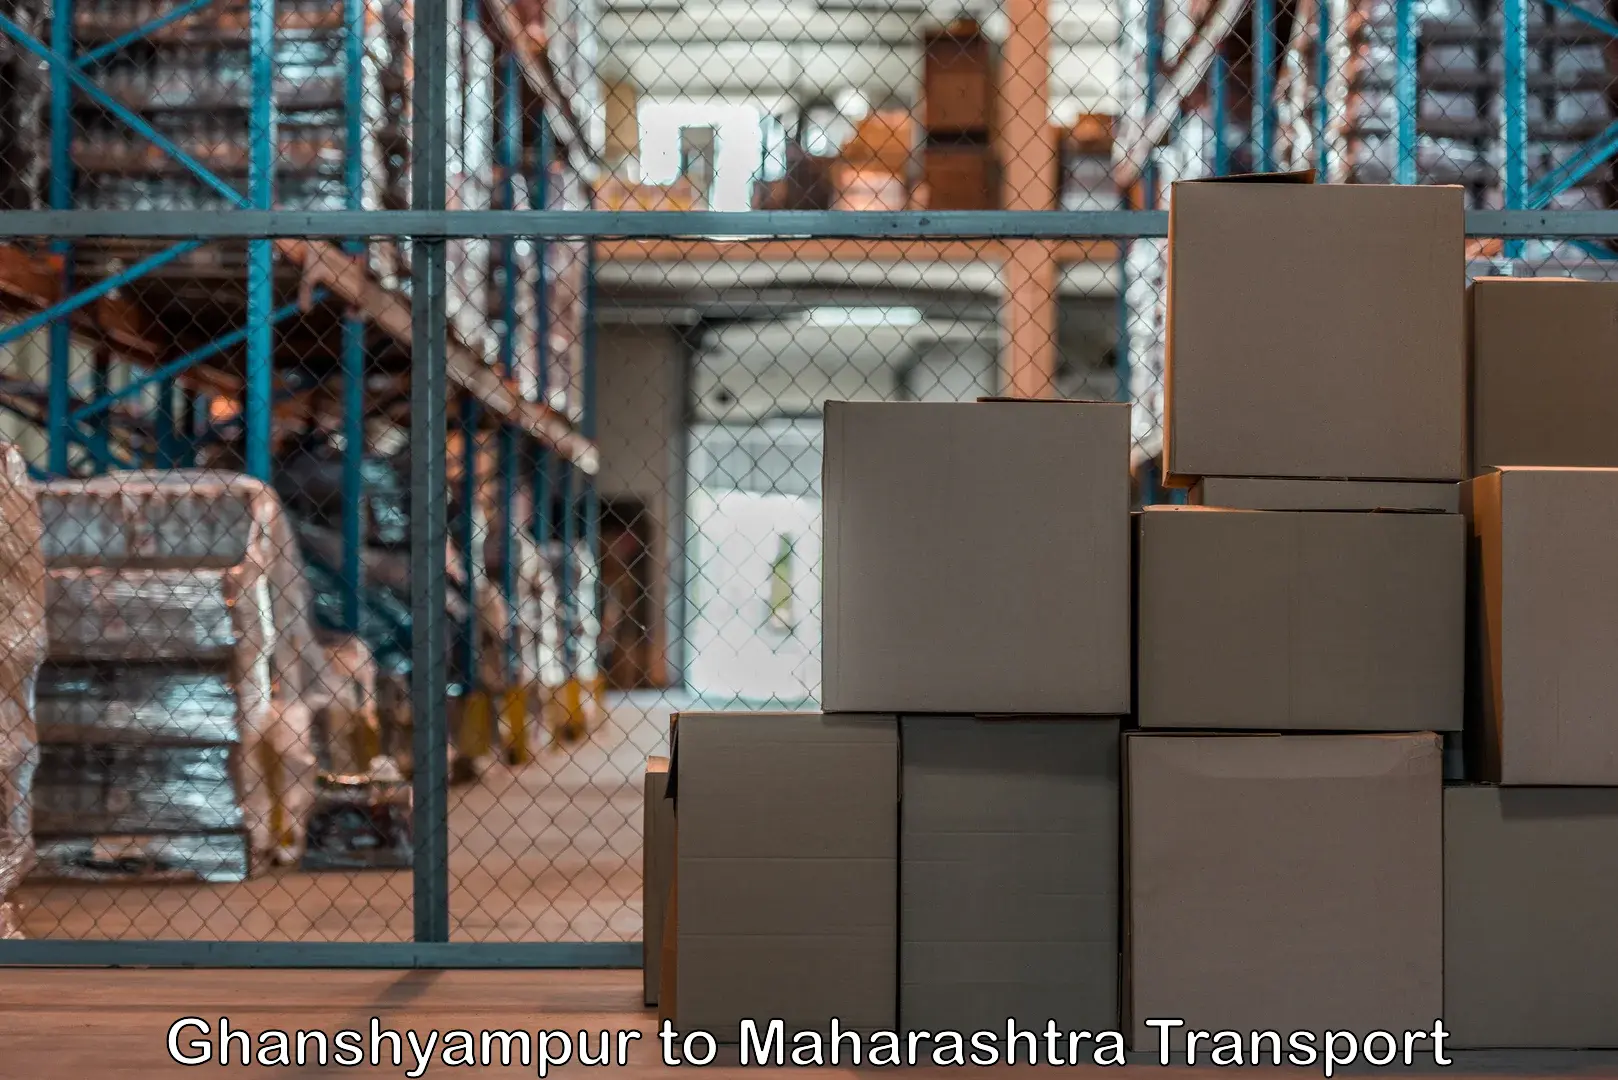 Land transport services in Ghanshyampur to Bhusawal